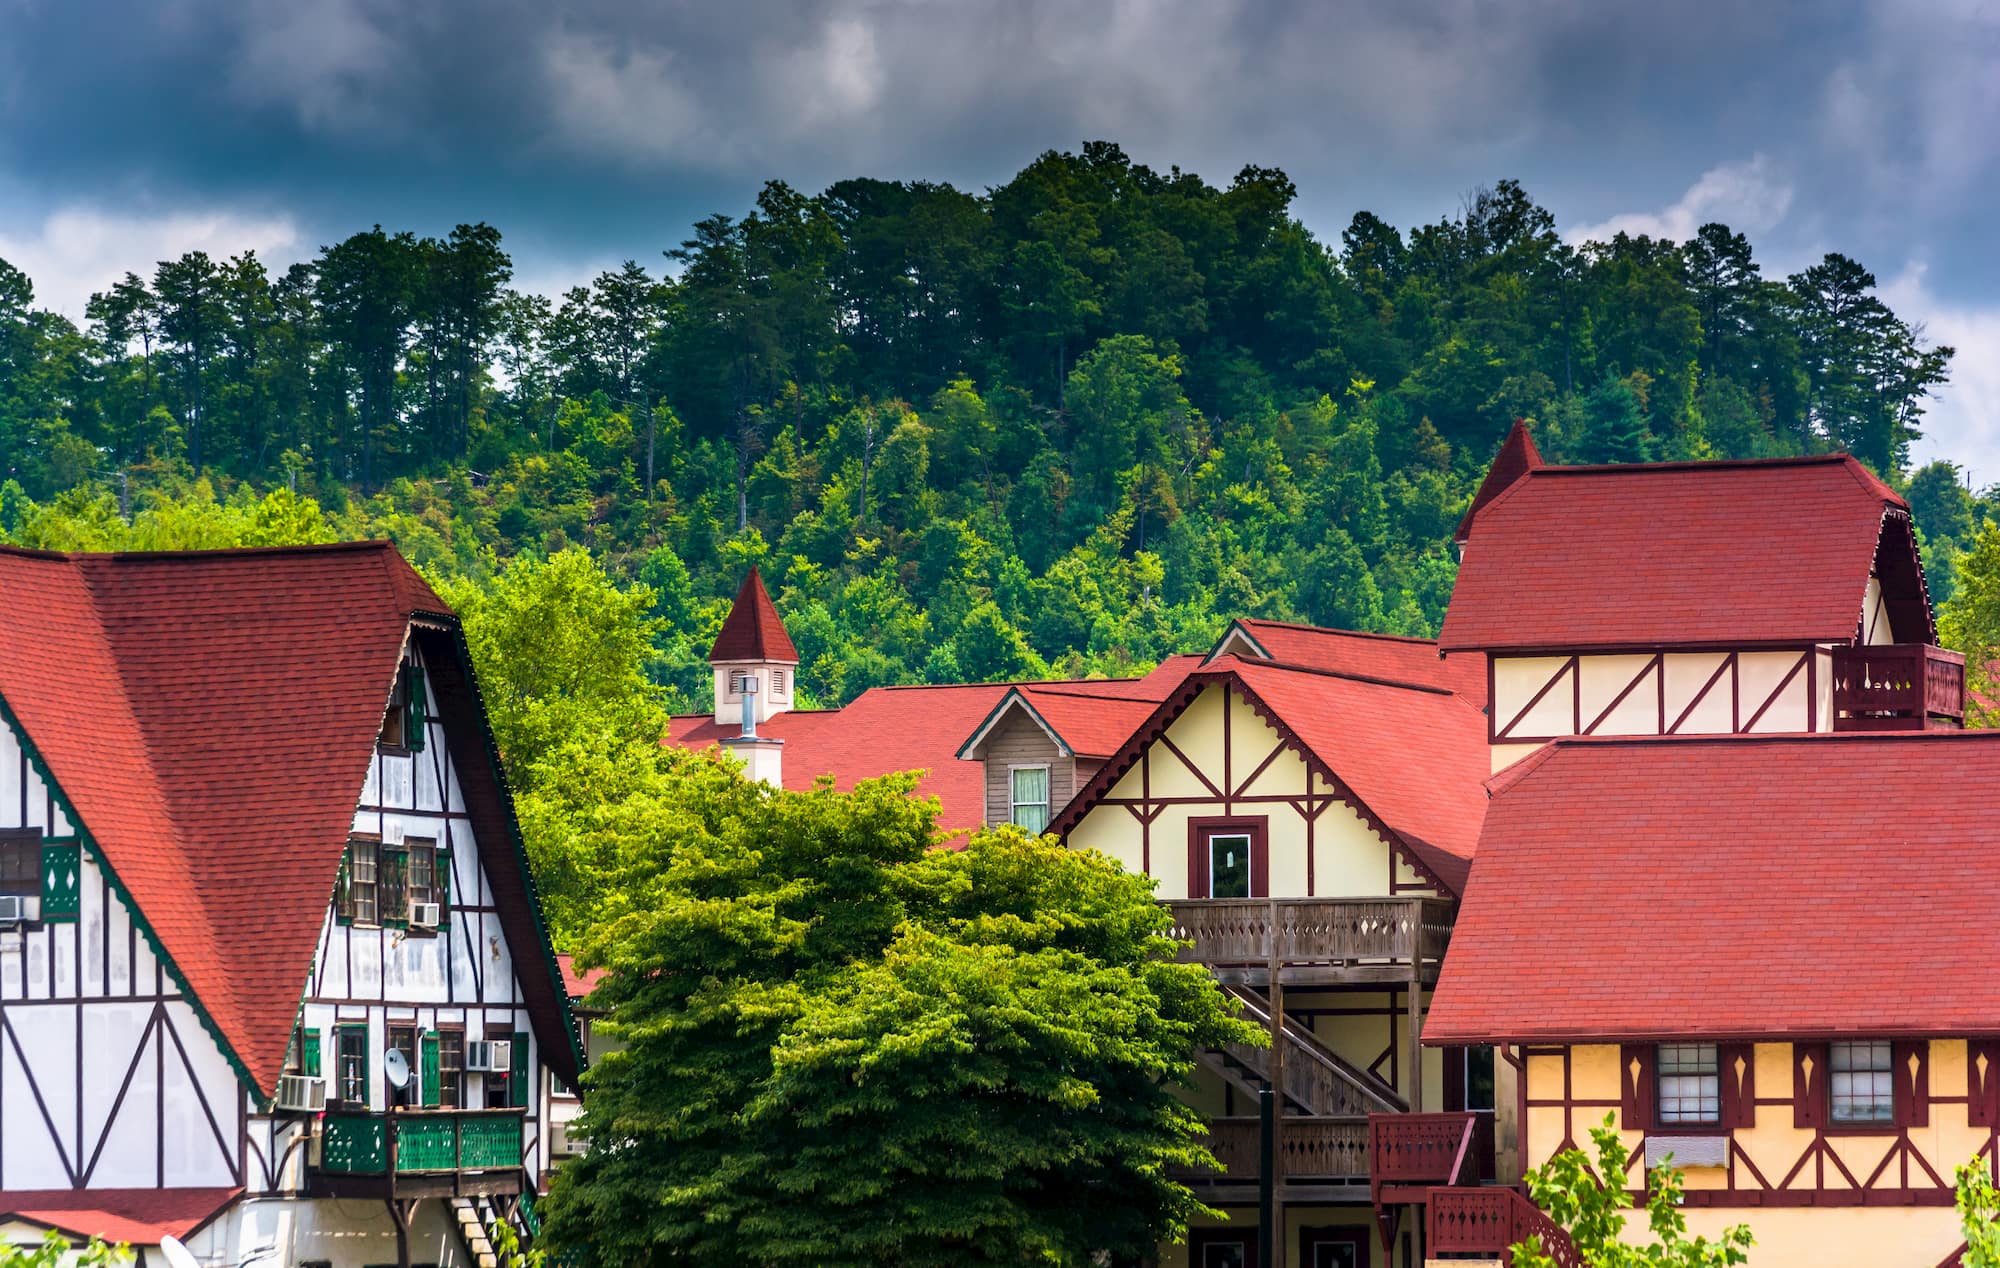 Panoramic view of Bavarian style houses in Helen, GA